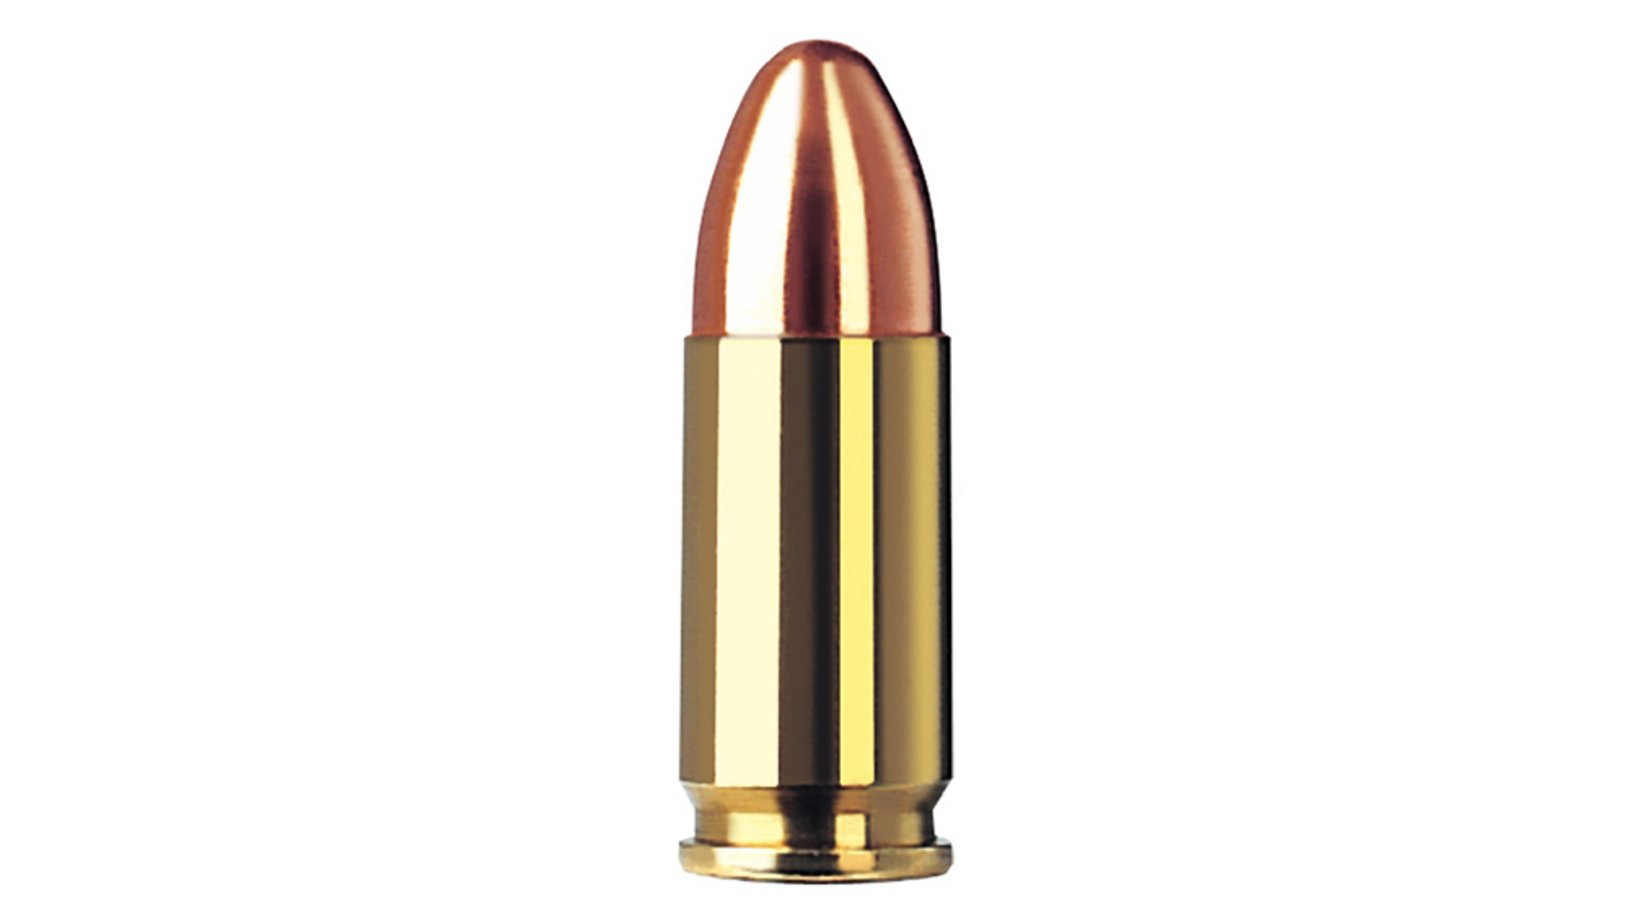 Single bullet view of GECO 9 mm Luger Lead Round Nose, copper-plated 8,0g